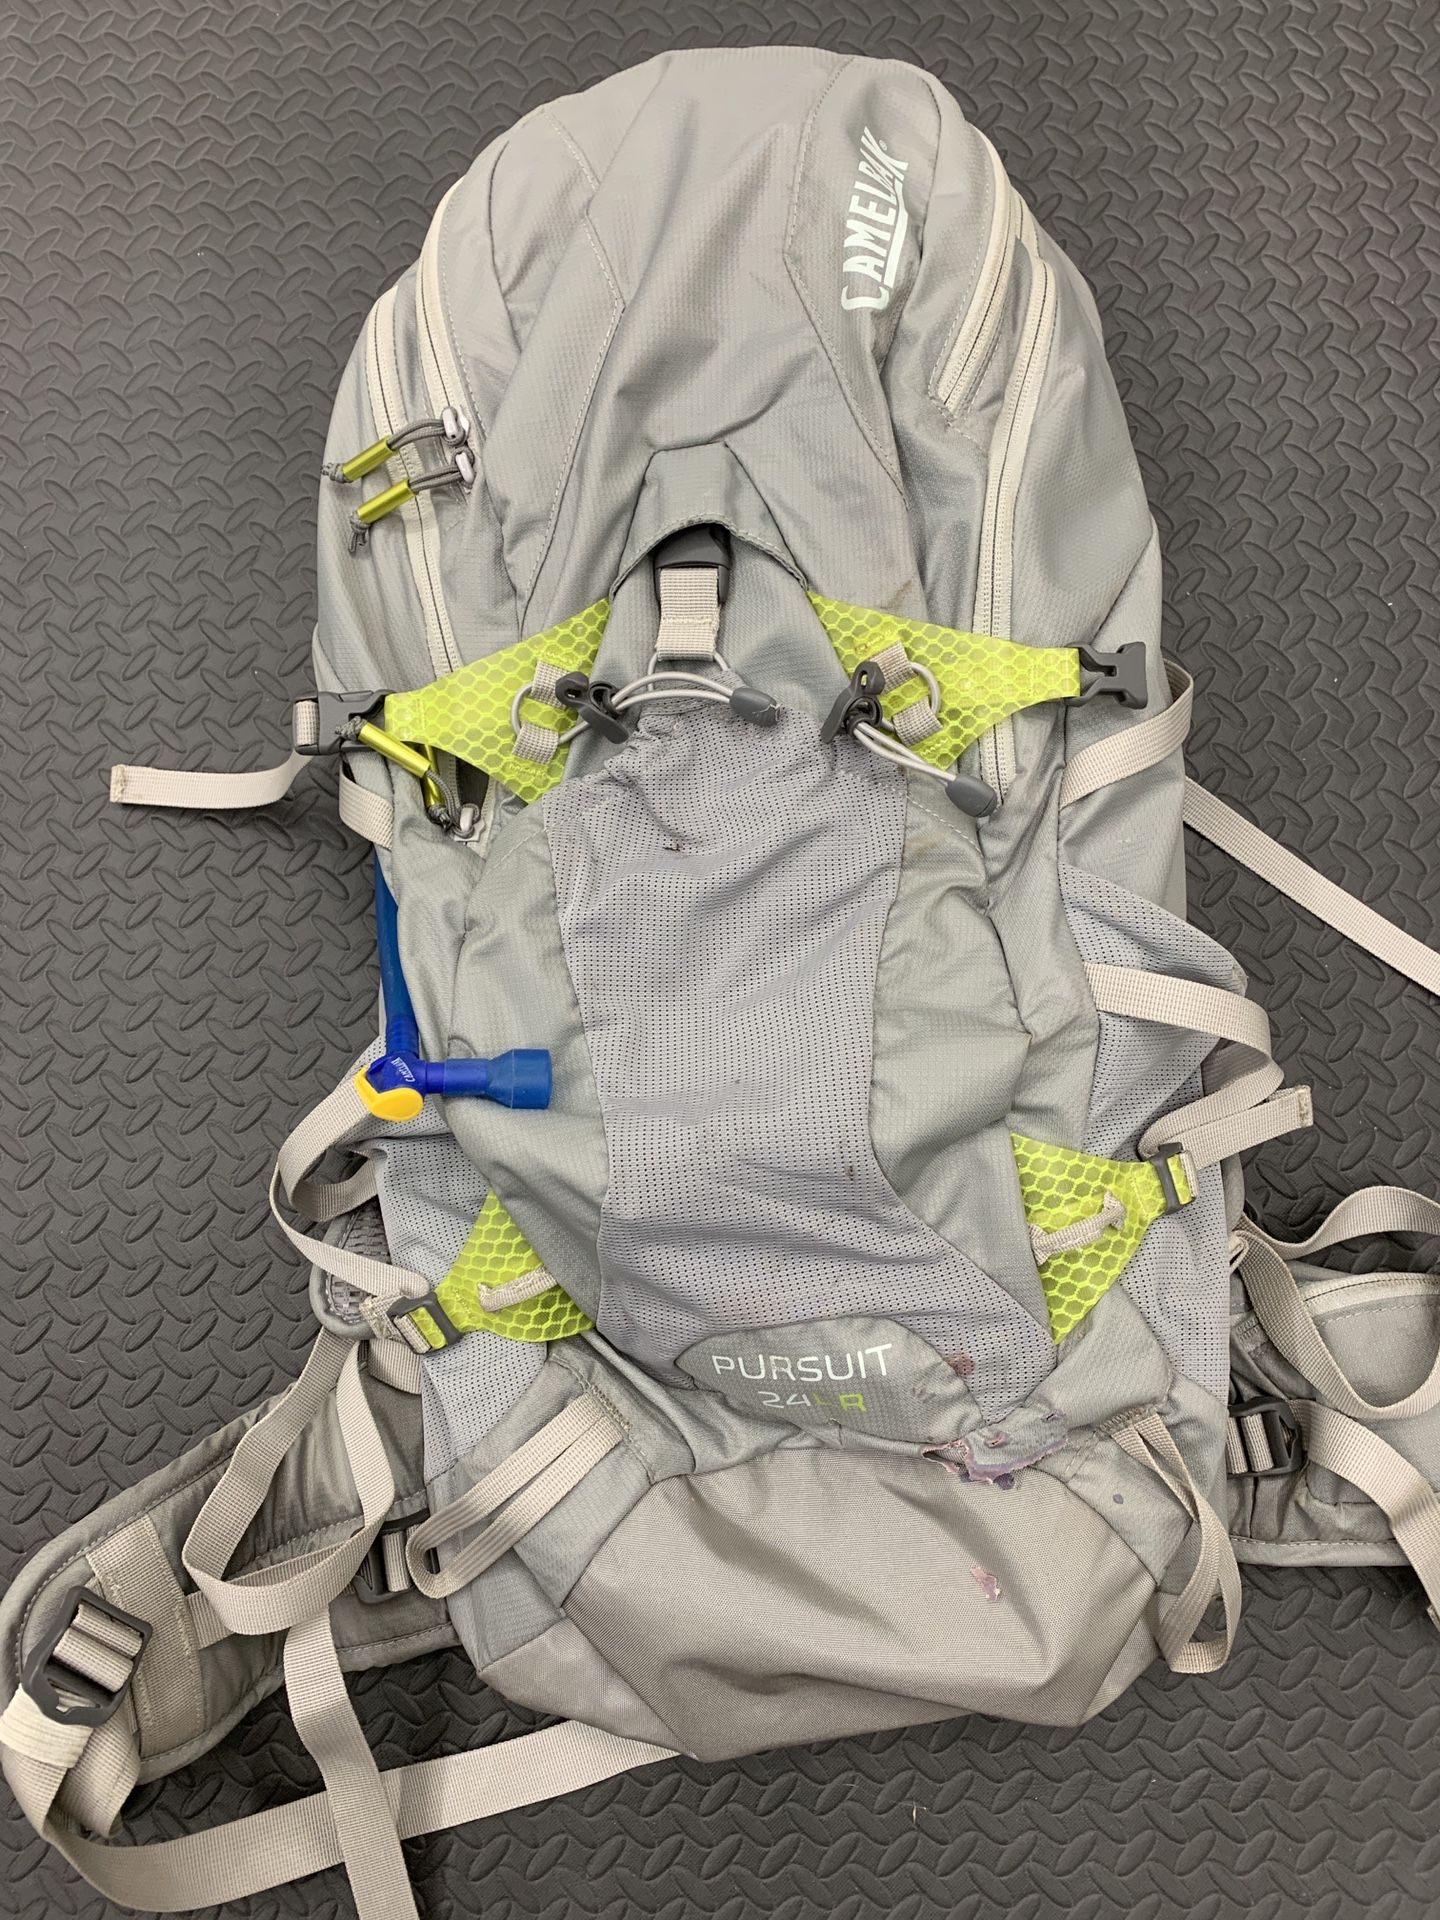 Multiday hiking backpack with hydration pack included